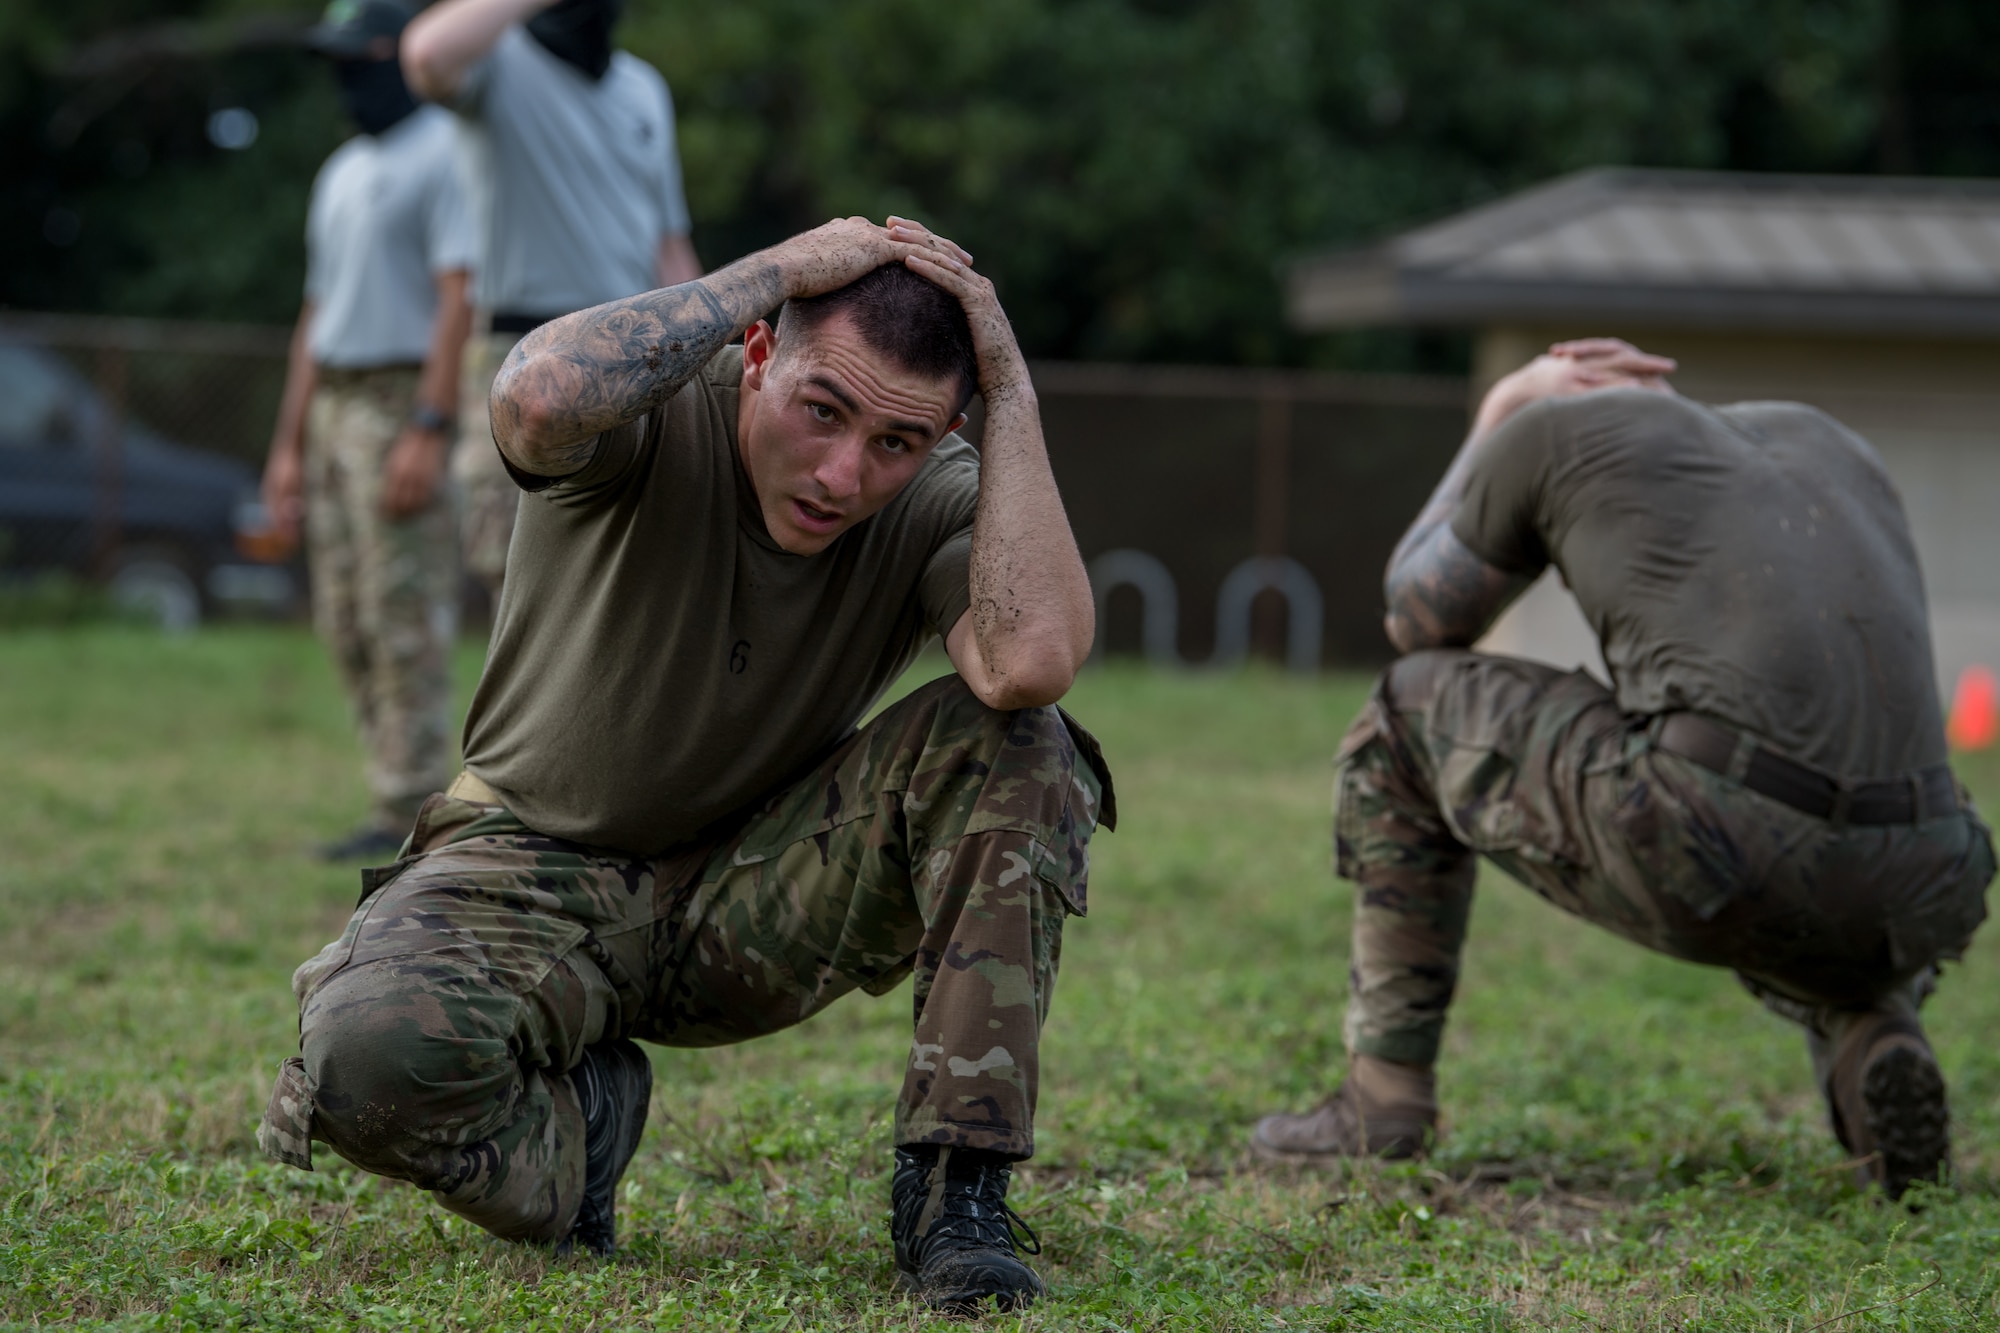 A Special Tactics tactical air control party candidate conducts an exercise walking along the grass in a crouched position with his hands behind his head.